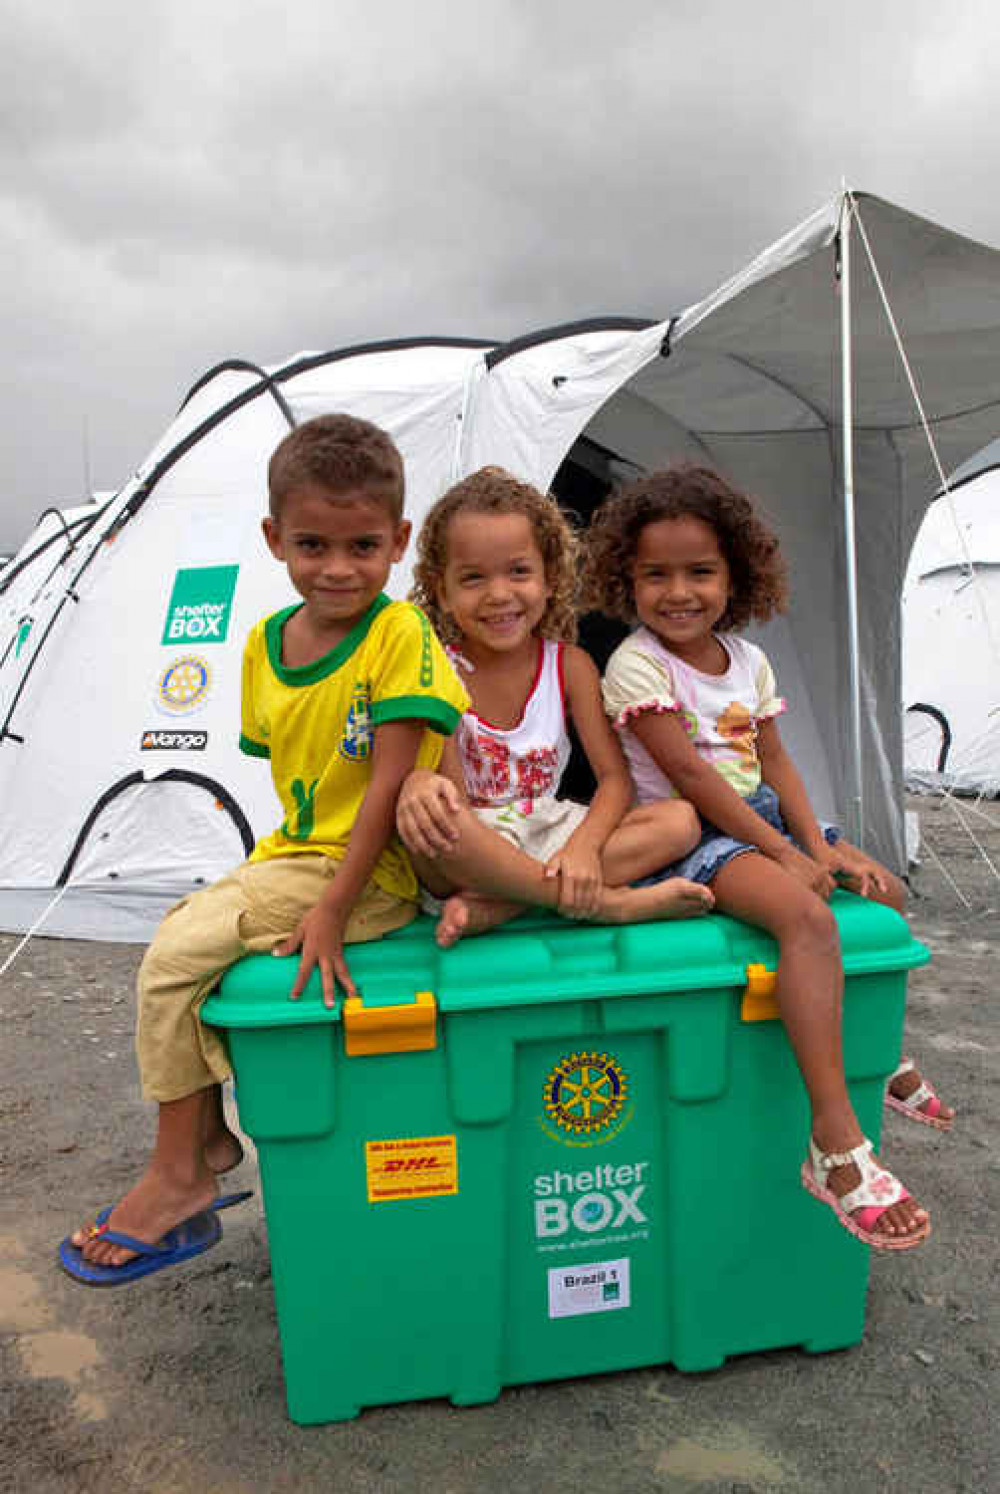 Kind-hearted Rotary Club of Hitchin Tilehouse backing ShelterBox charity challenge 'Tent for Lent' PICTURE: Tent for Lent in Brazil. CREDIT: ShelterBox